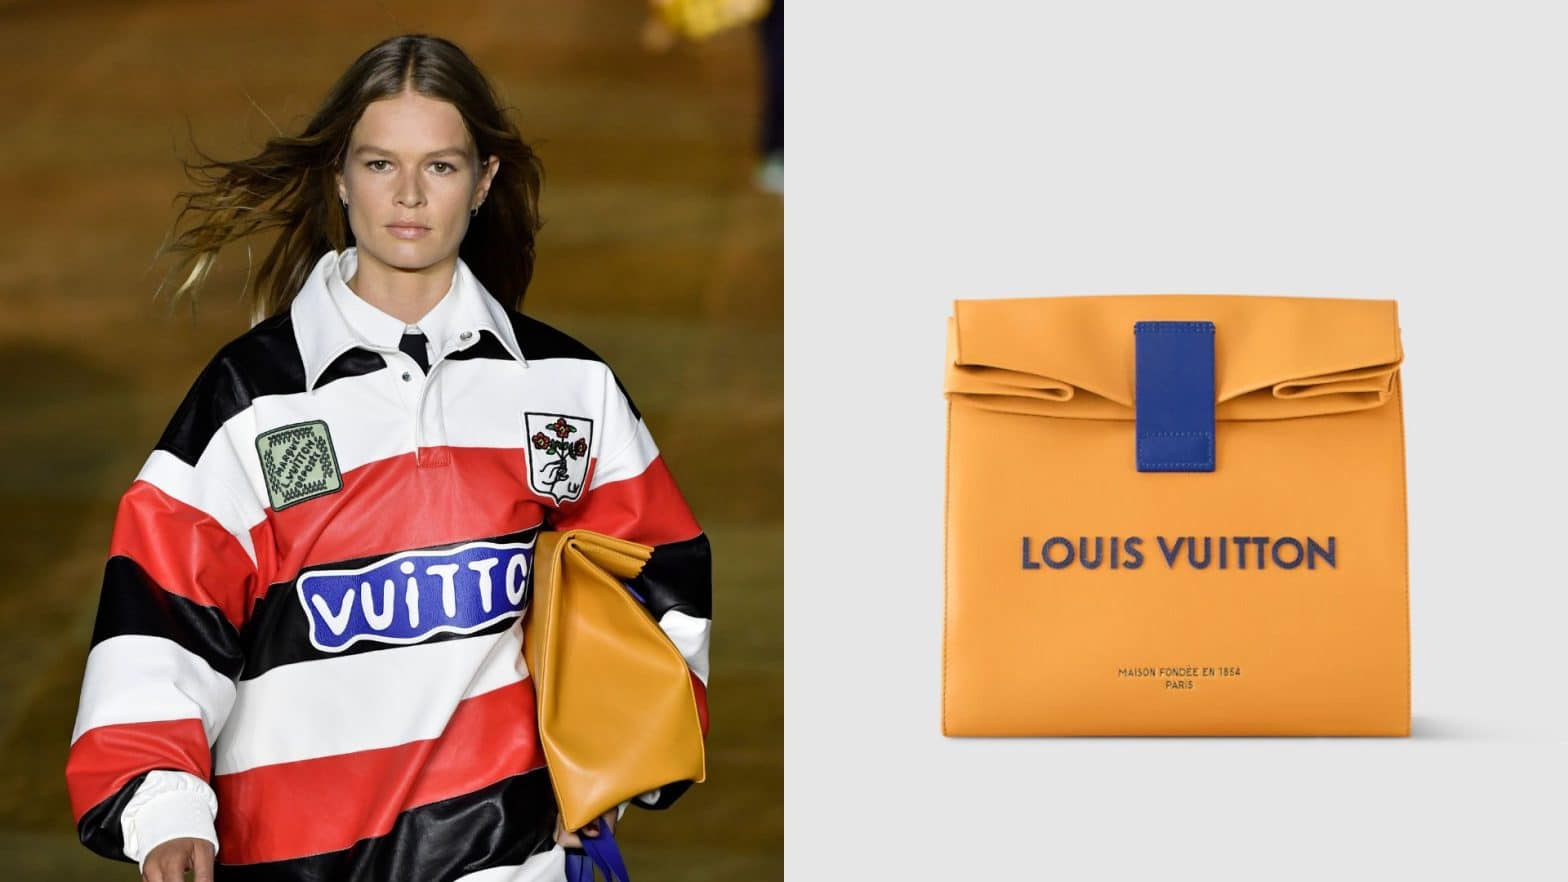 Can You Buy The Louis Vuitton Sandwich Bag in The UAE?